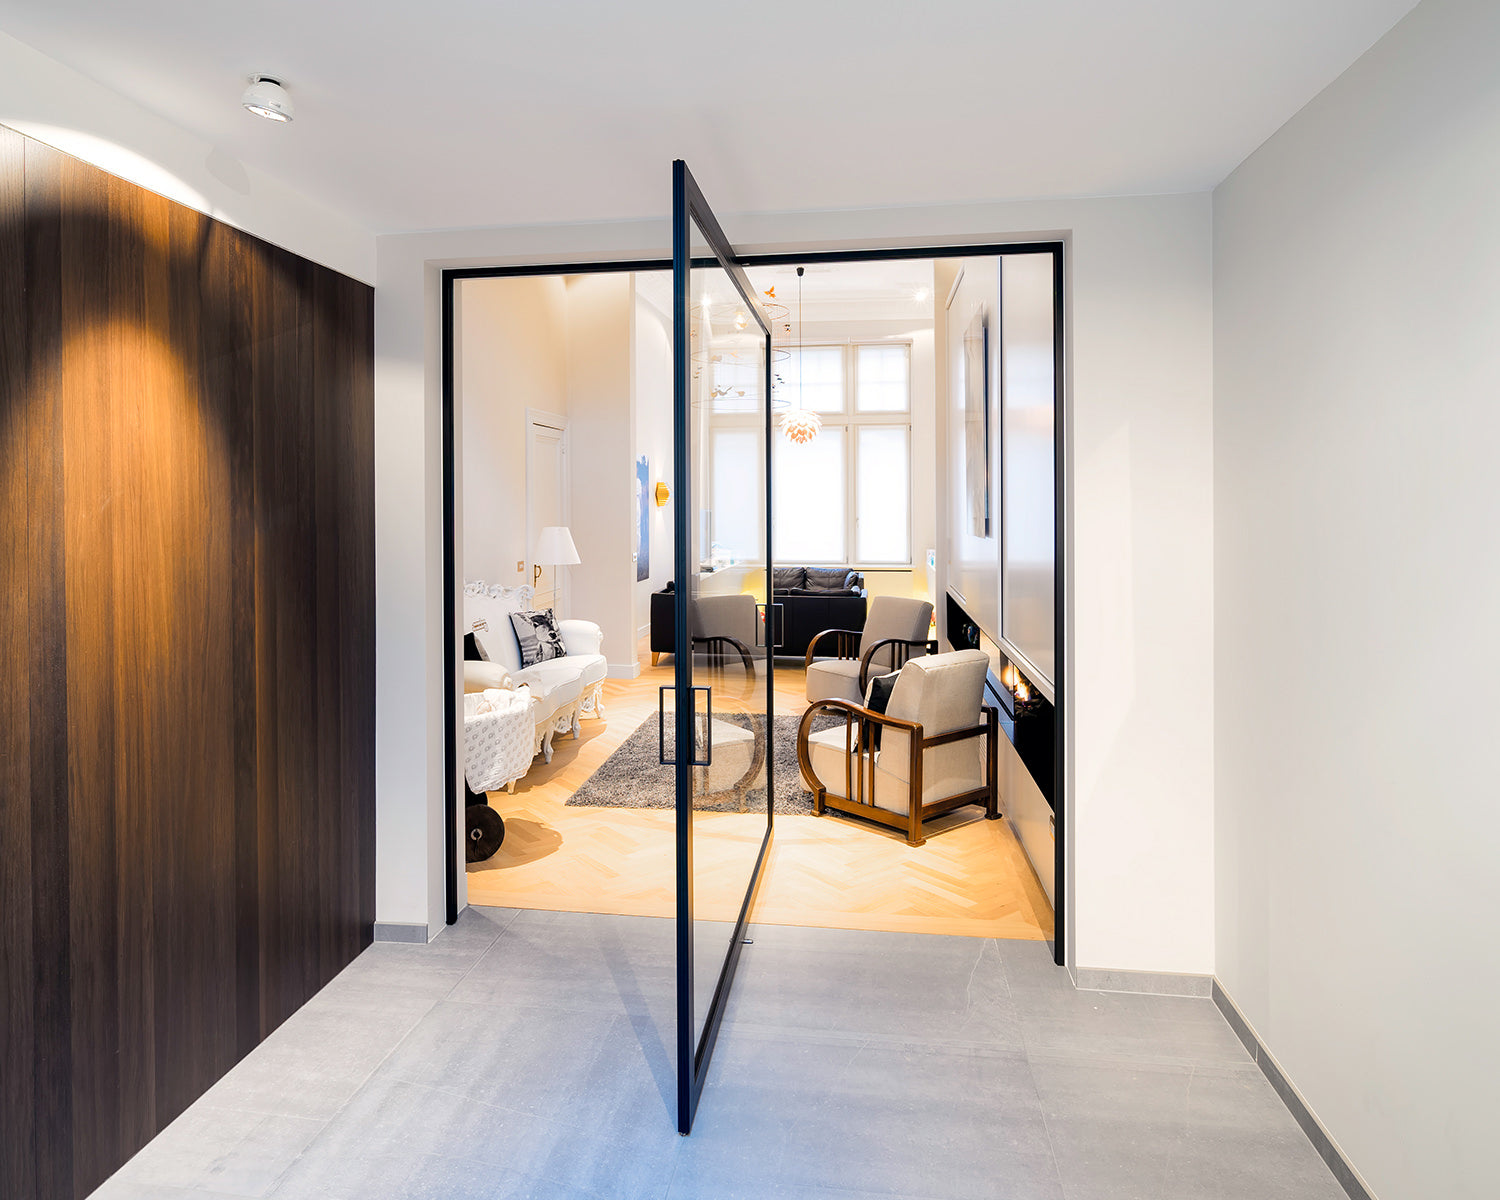 Central axis pivot door with 360° functionality